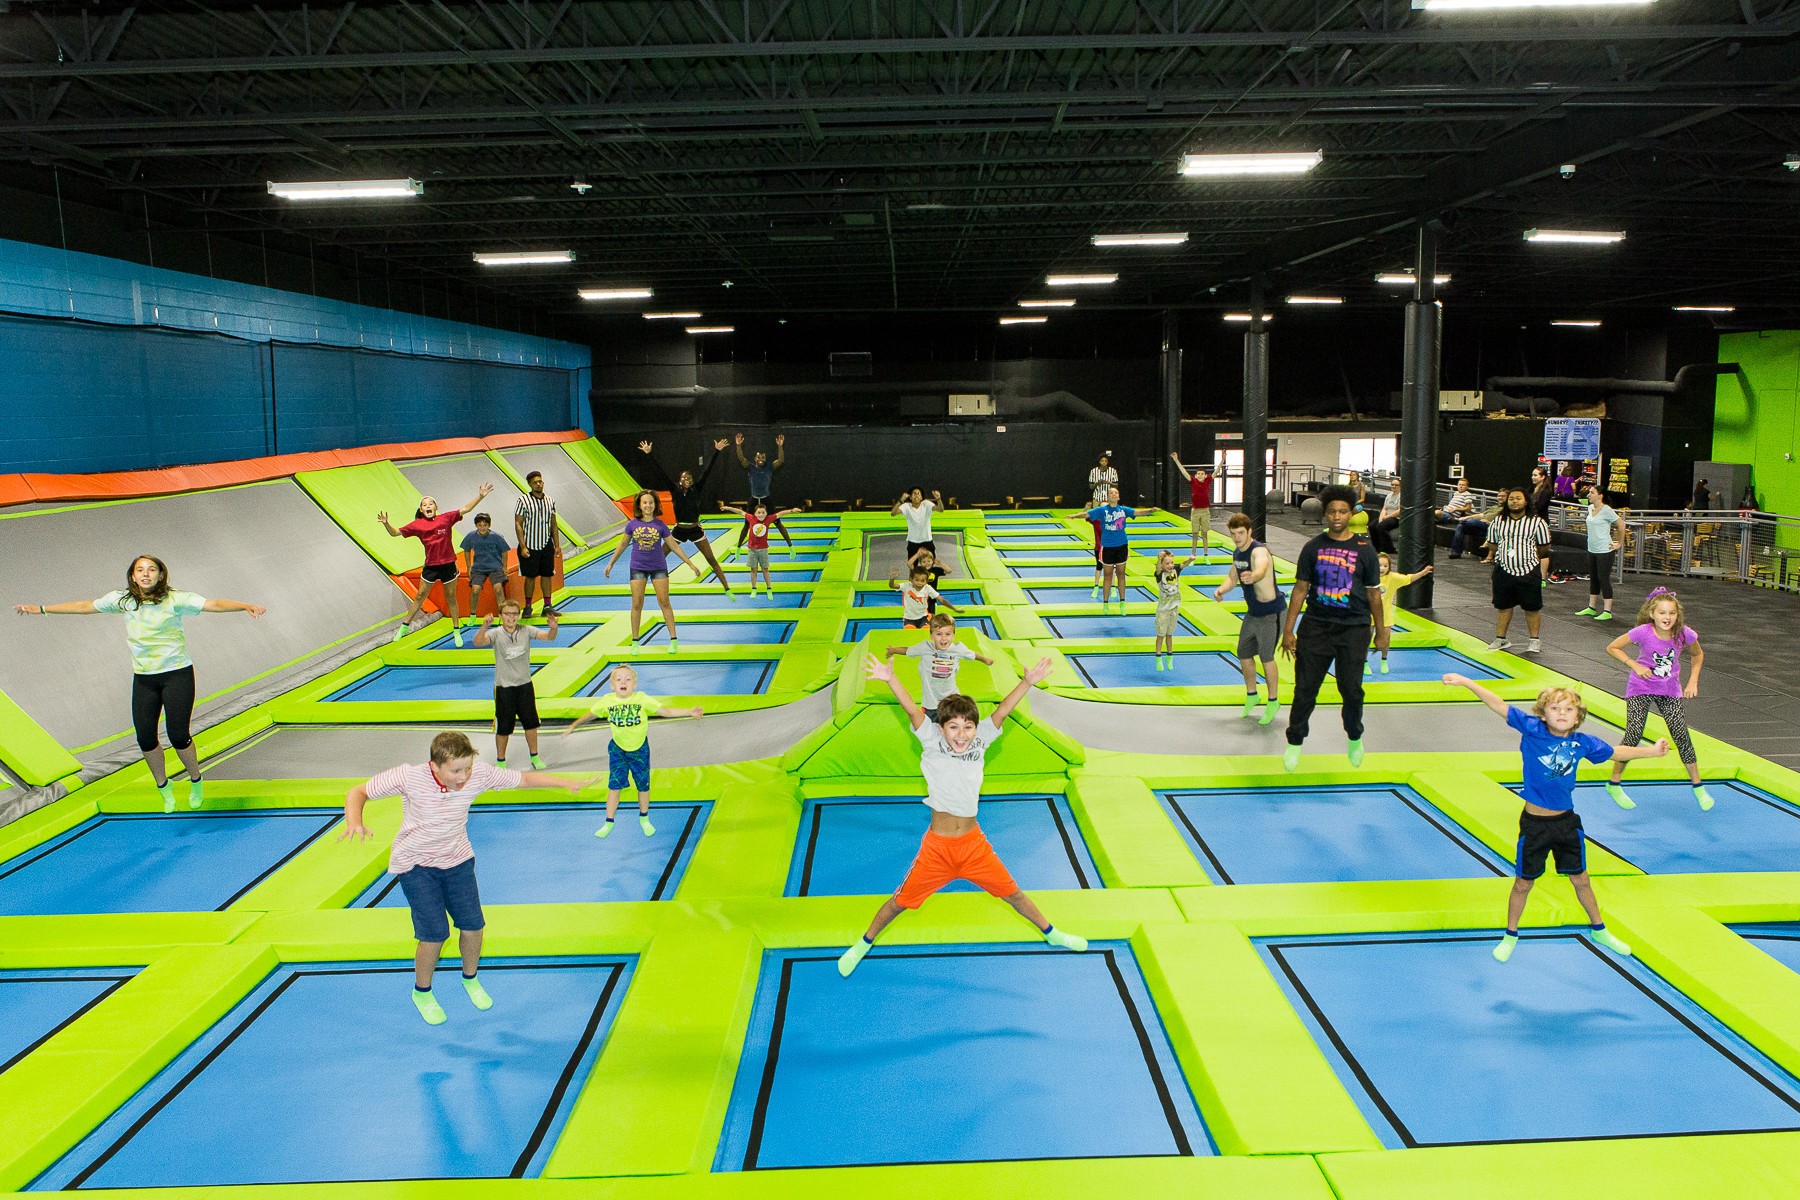 *Facebook Friday Freebie! Win a Family Four Pack of FUN at Xdrenaline!